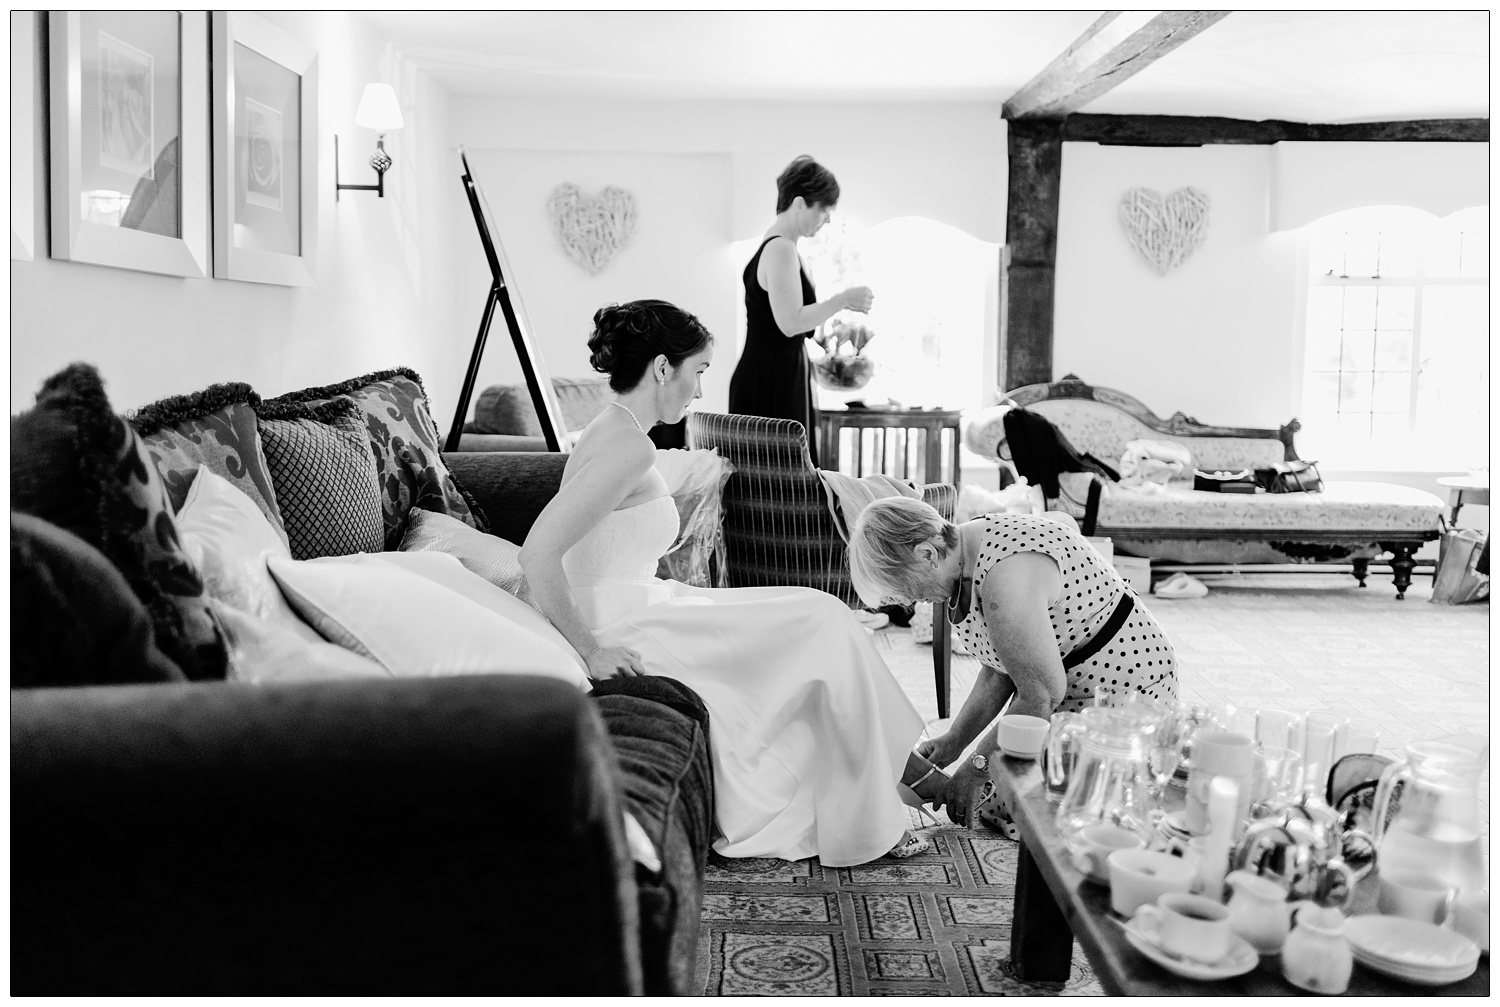 Bride having help with her shoes in a black and white photograph